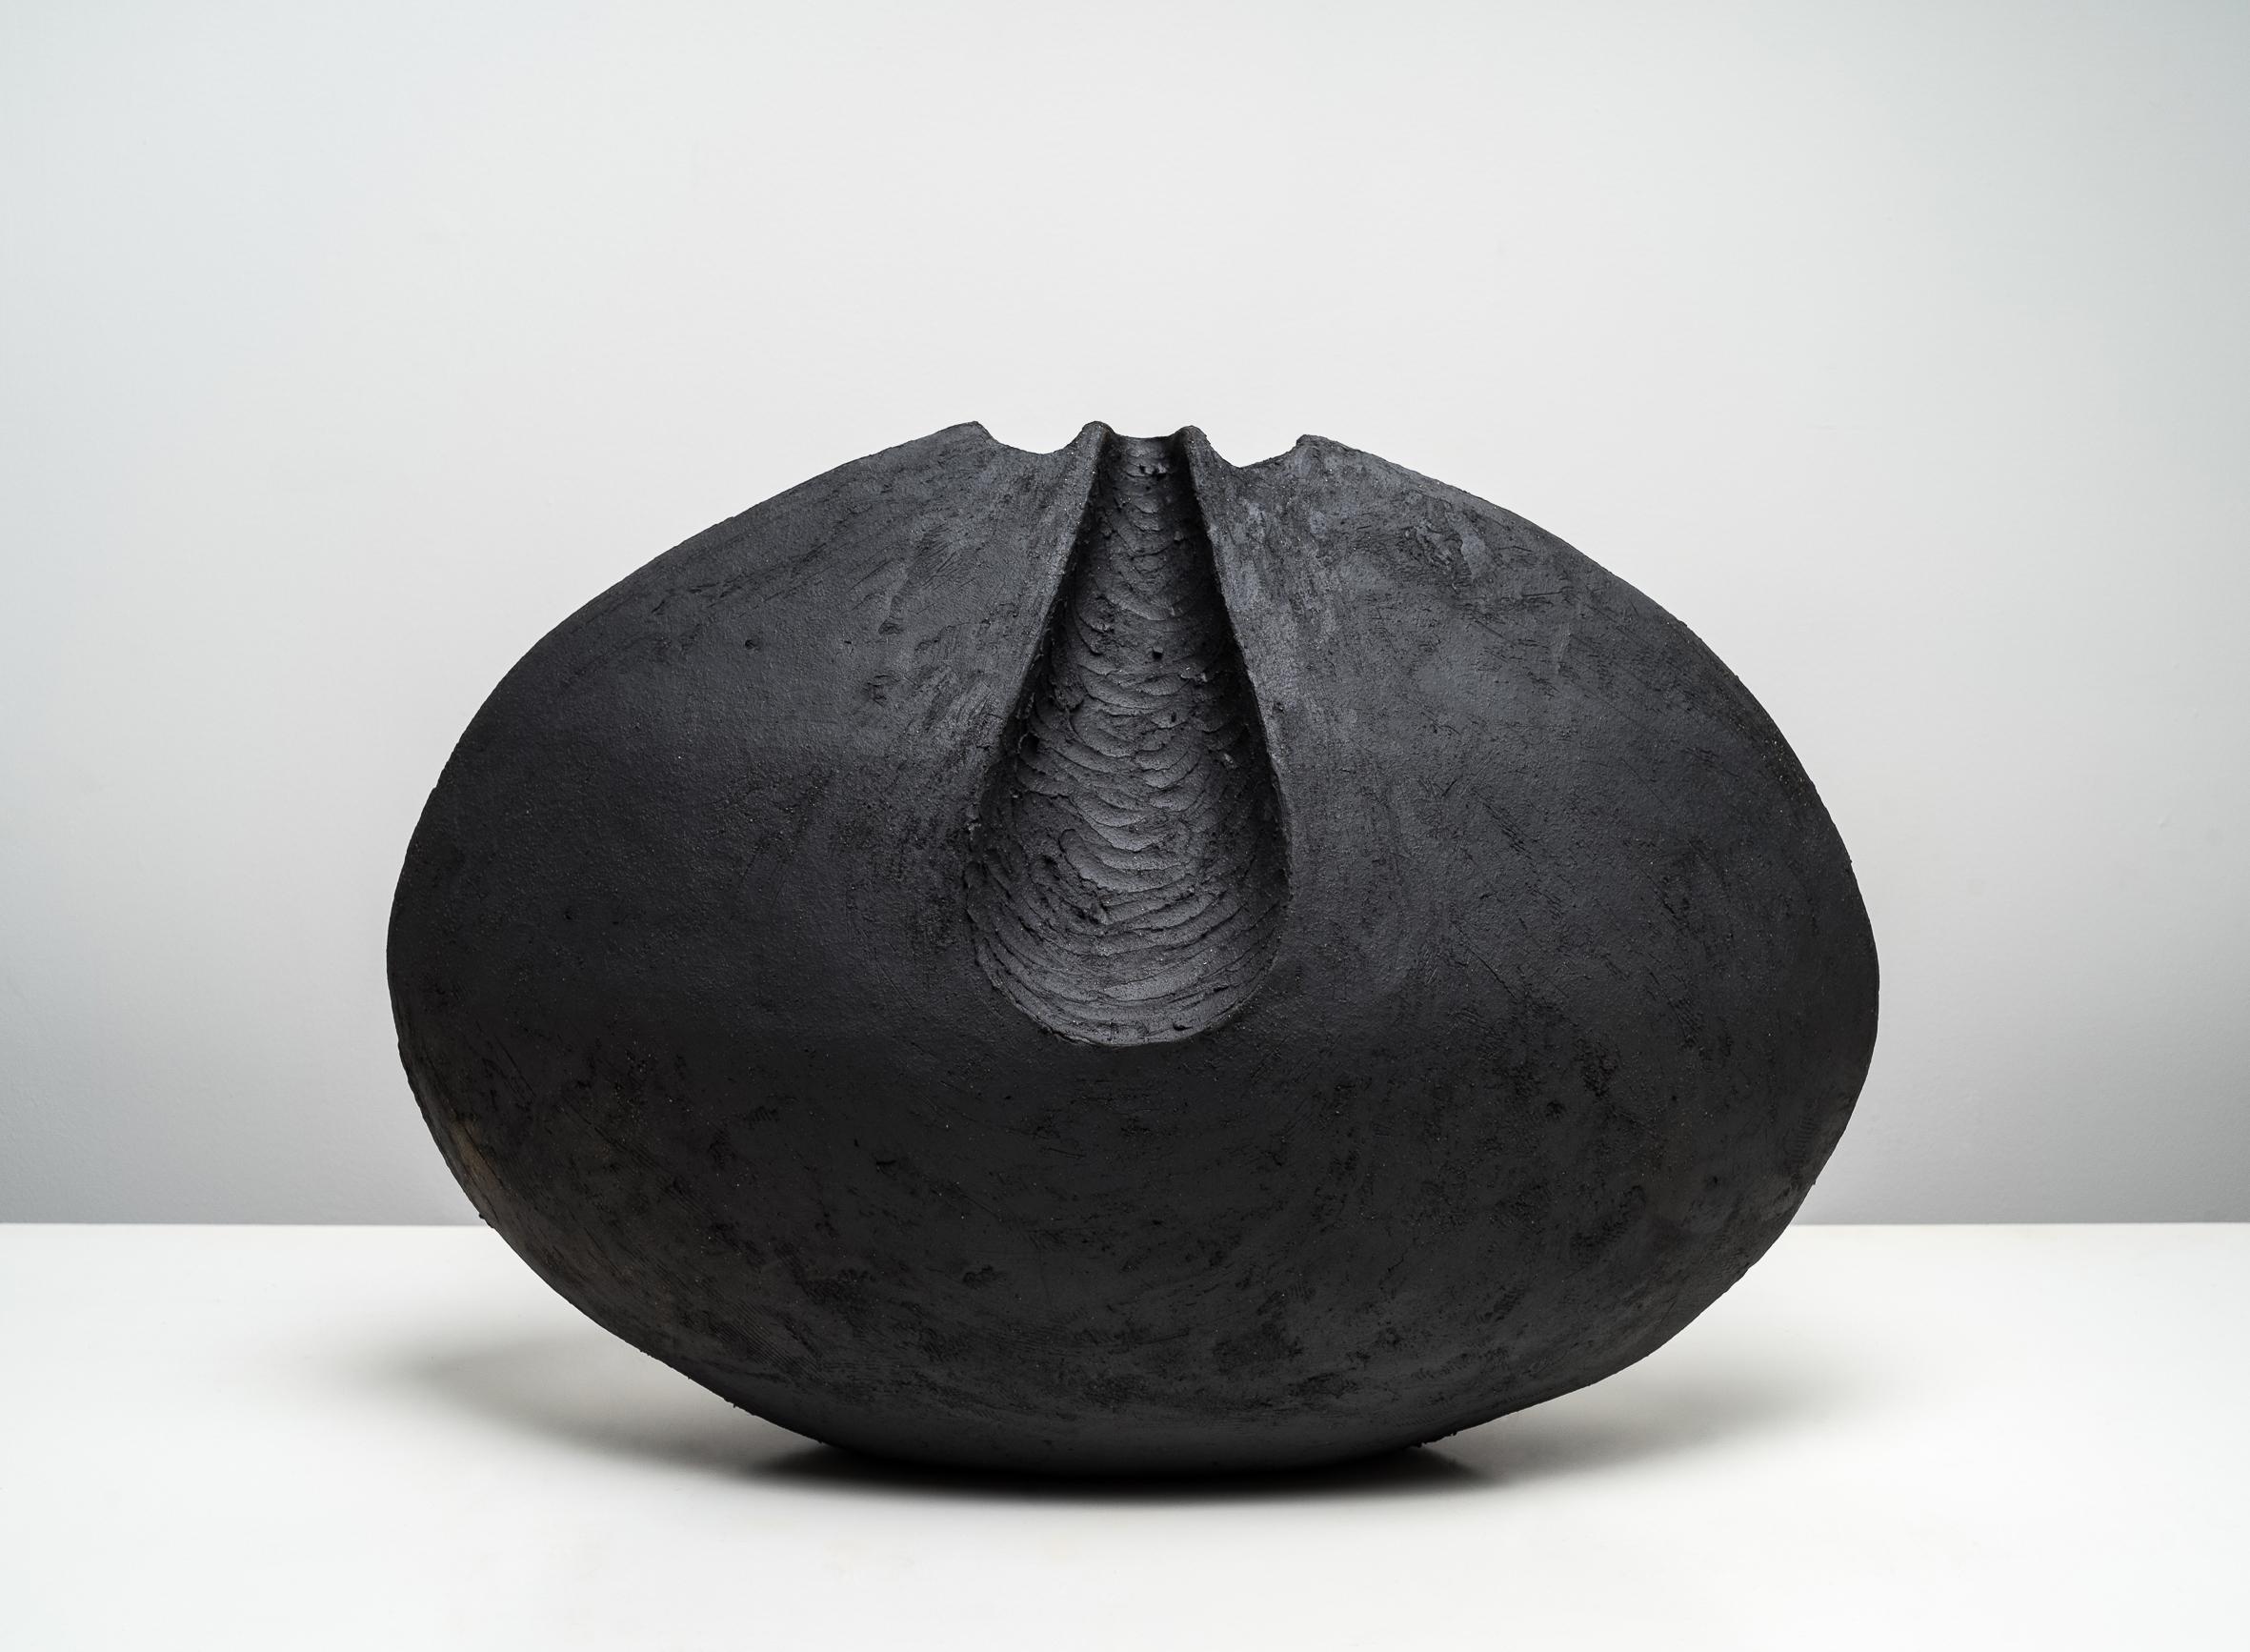 Artist Commentary:
Black stoneware; cone 5/6 oxidation firing

"Inspired by my nieces voluptuous pregnant belly "

Keywords: vessel, ceramic, classic, minimal, clay, black, classical, minimal, round

Artist Biography: 
Beverly Morrison (Los Angeles,